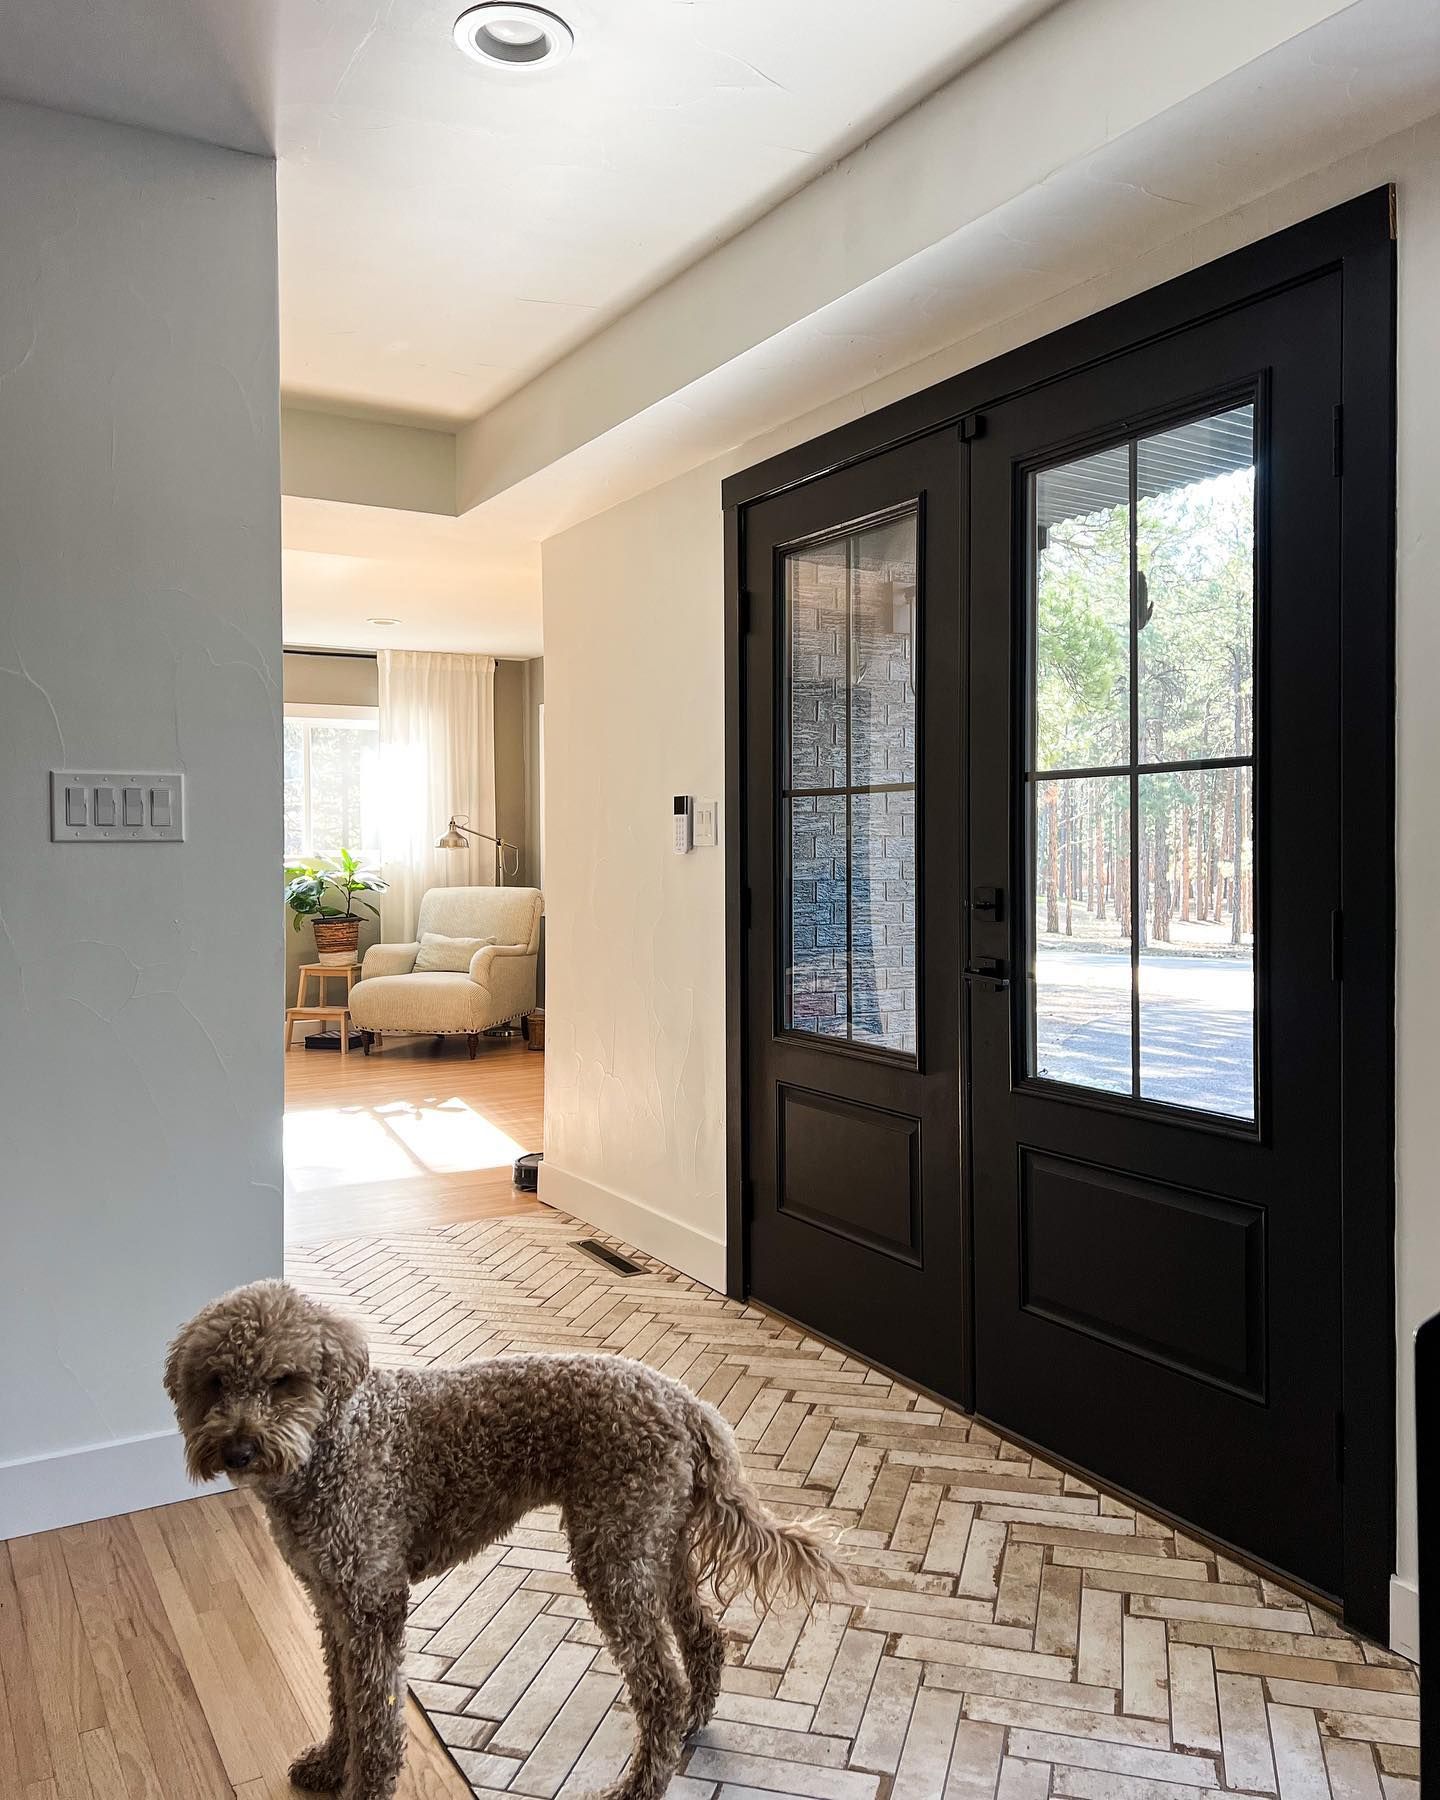 A dog is standing in a hallway next to a black door.